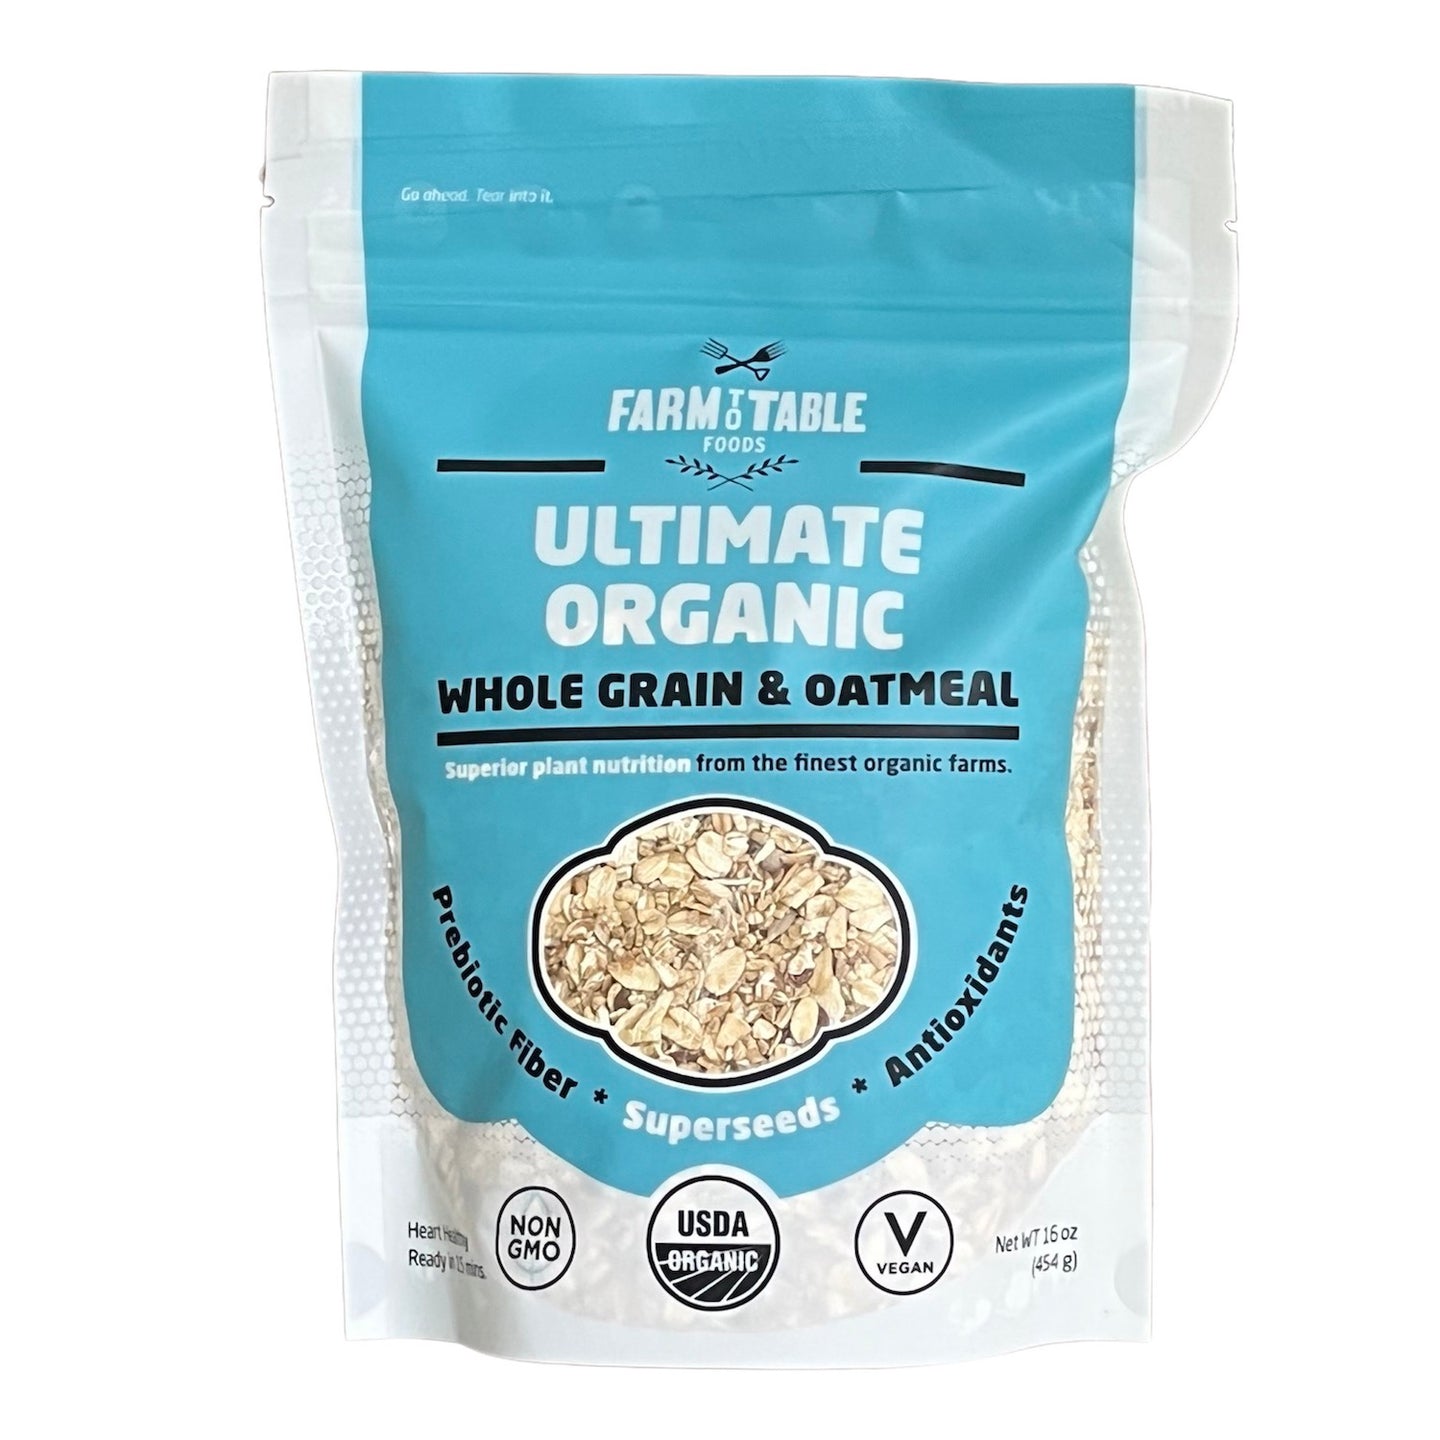 Ultimate Organic Oatmeal & Whole Grain 3 pack - Farm to Table Foods.